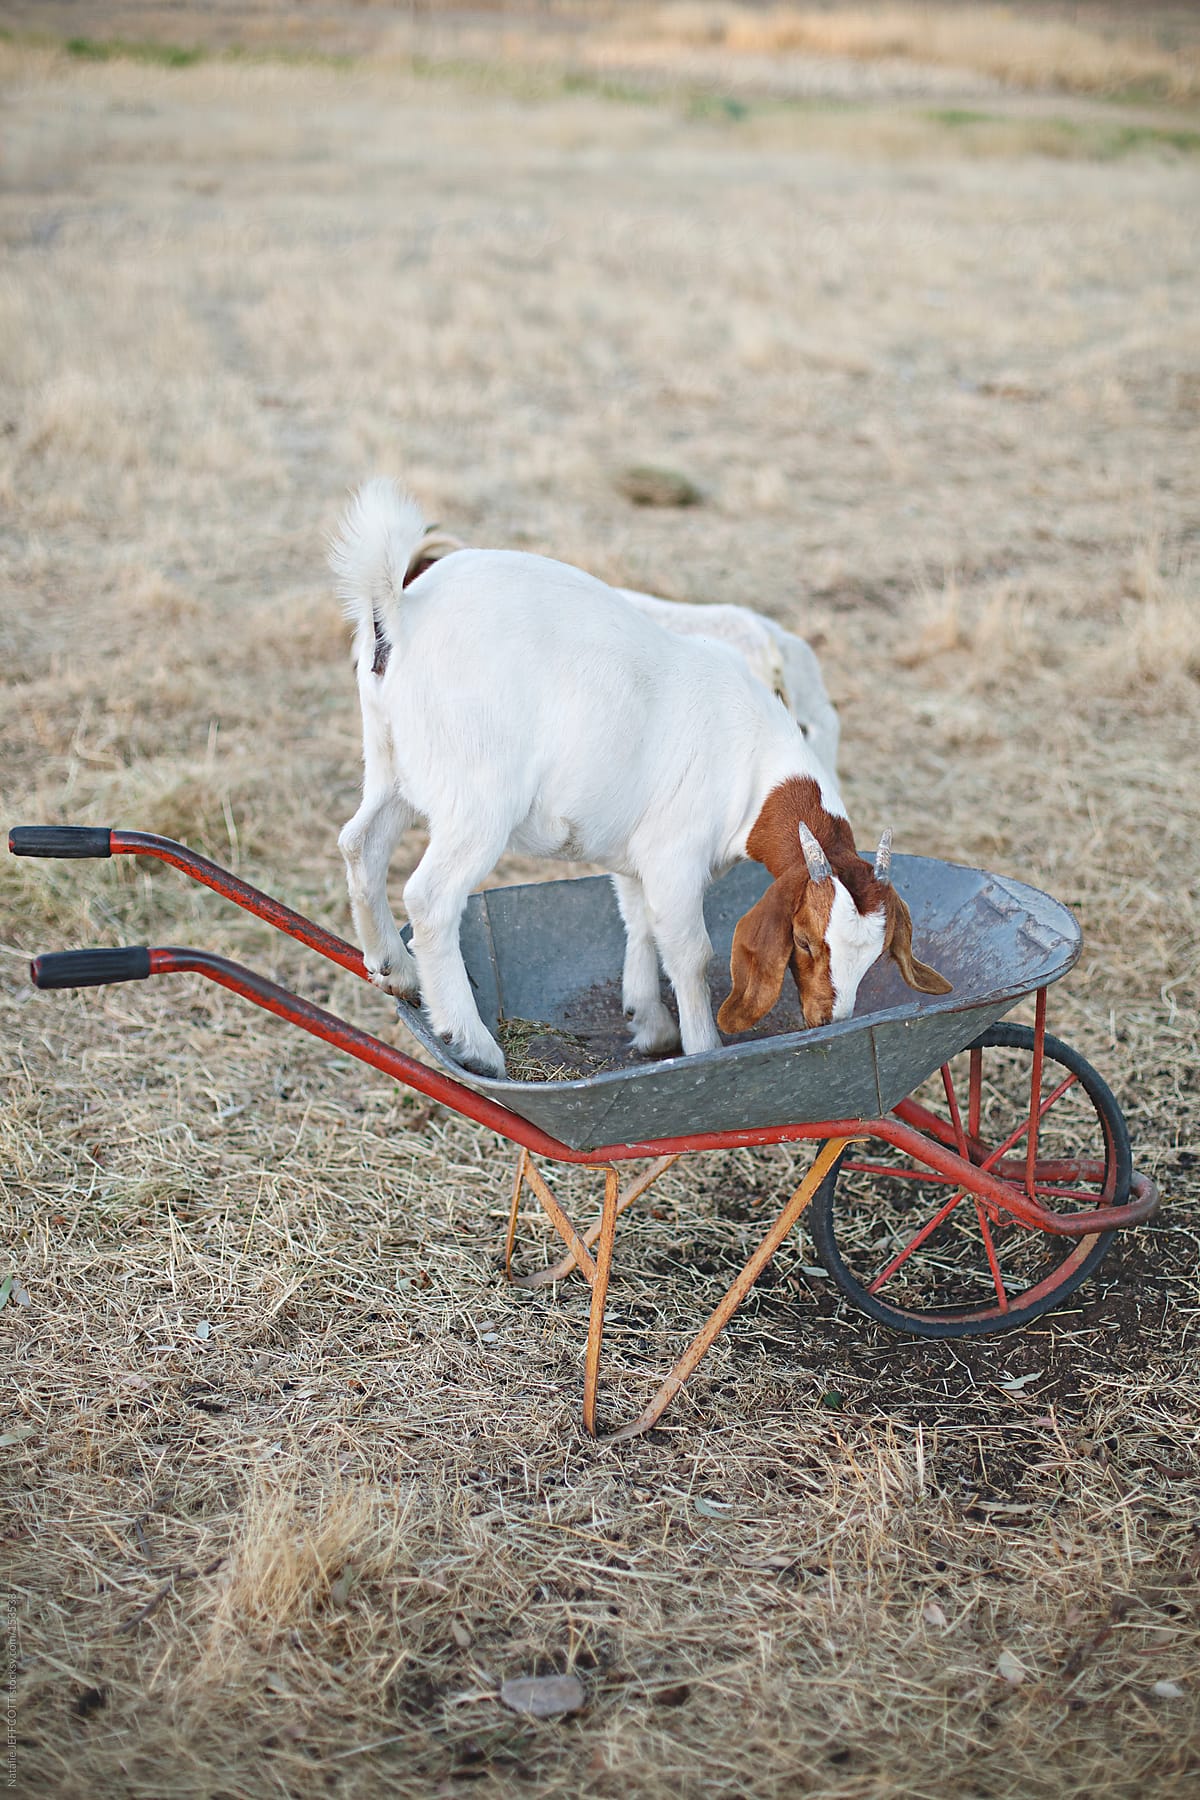 Hungry goat stands in wheel barrow to find food